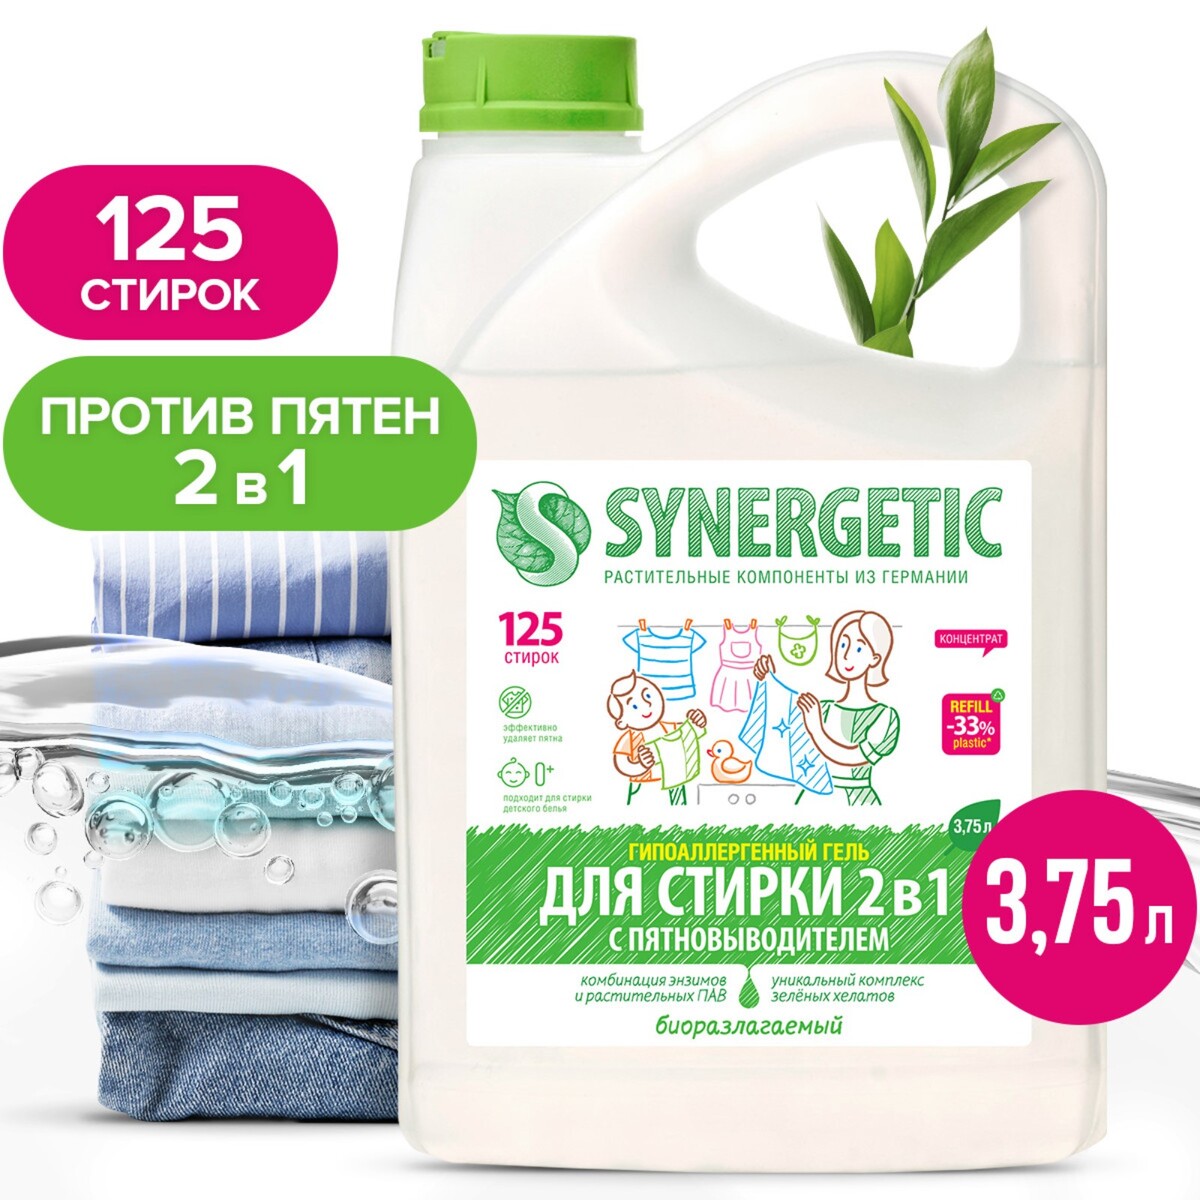     synergetic, , , 3.37 